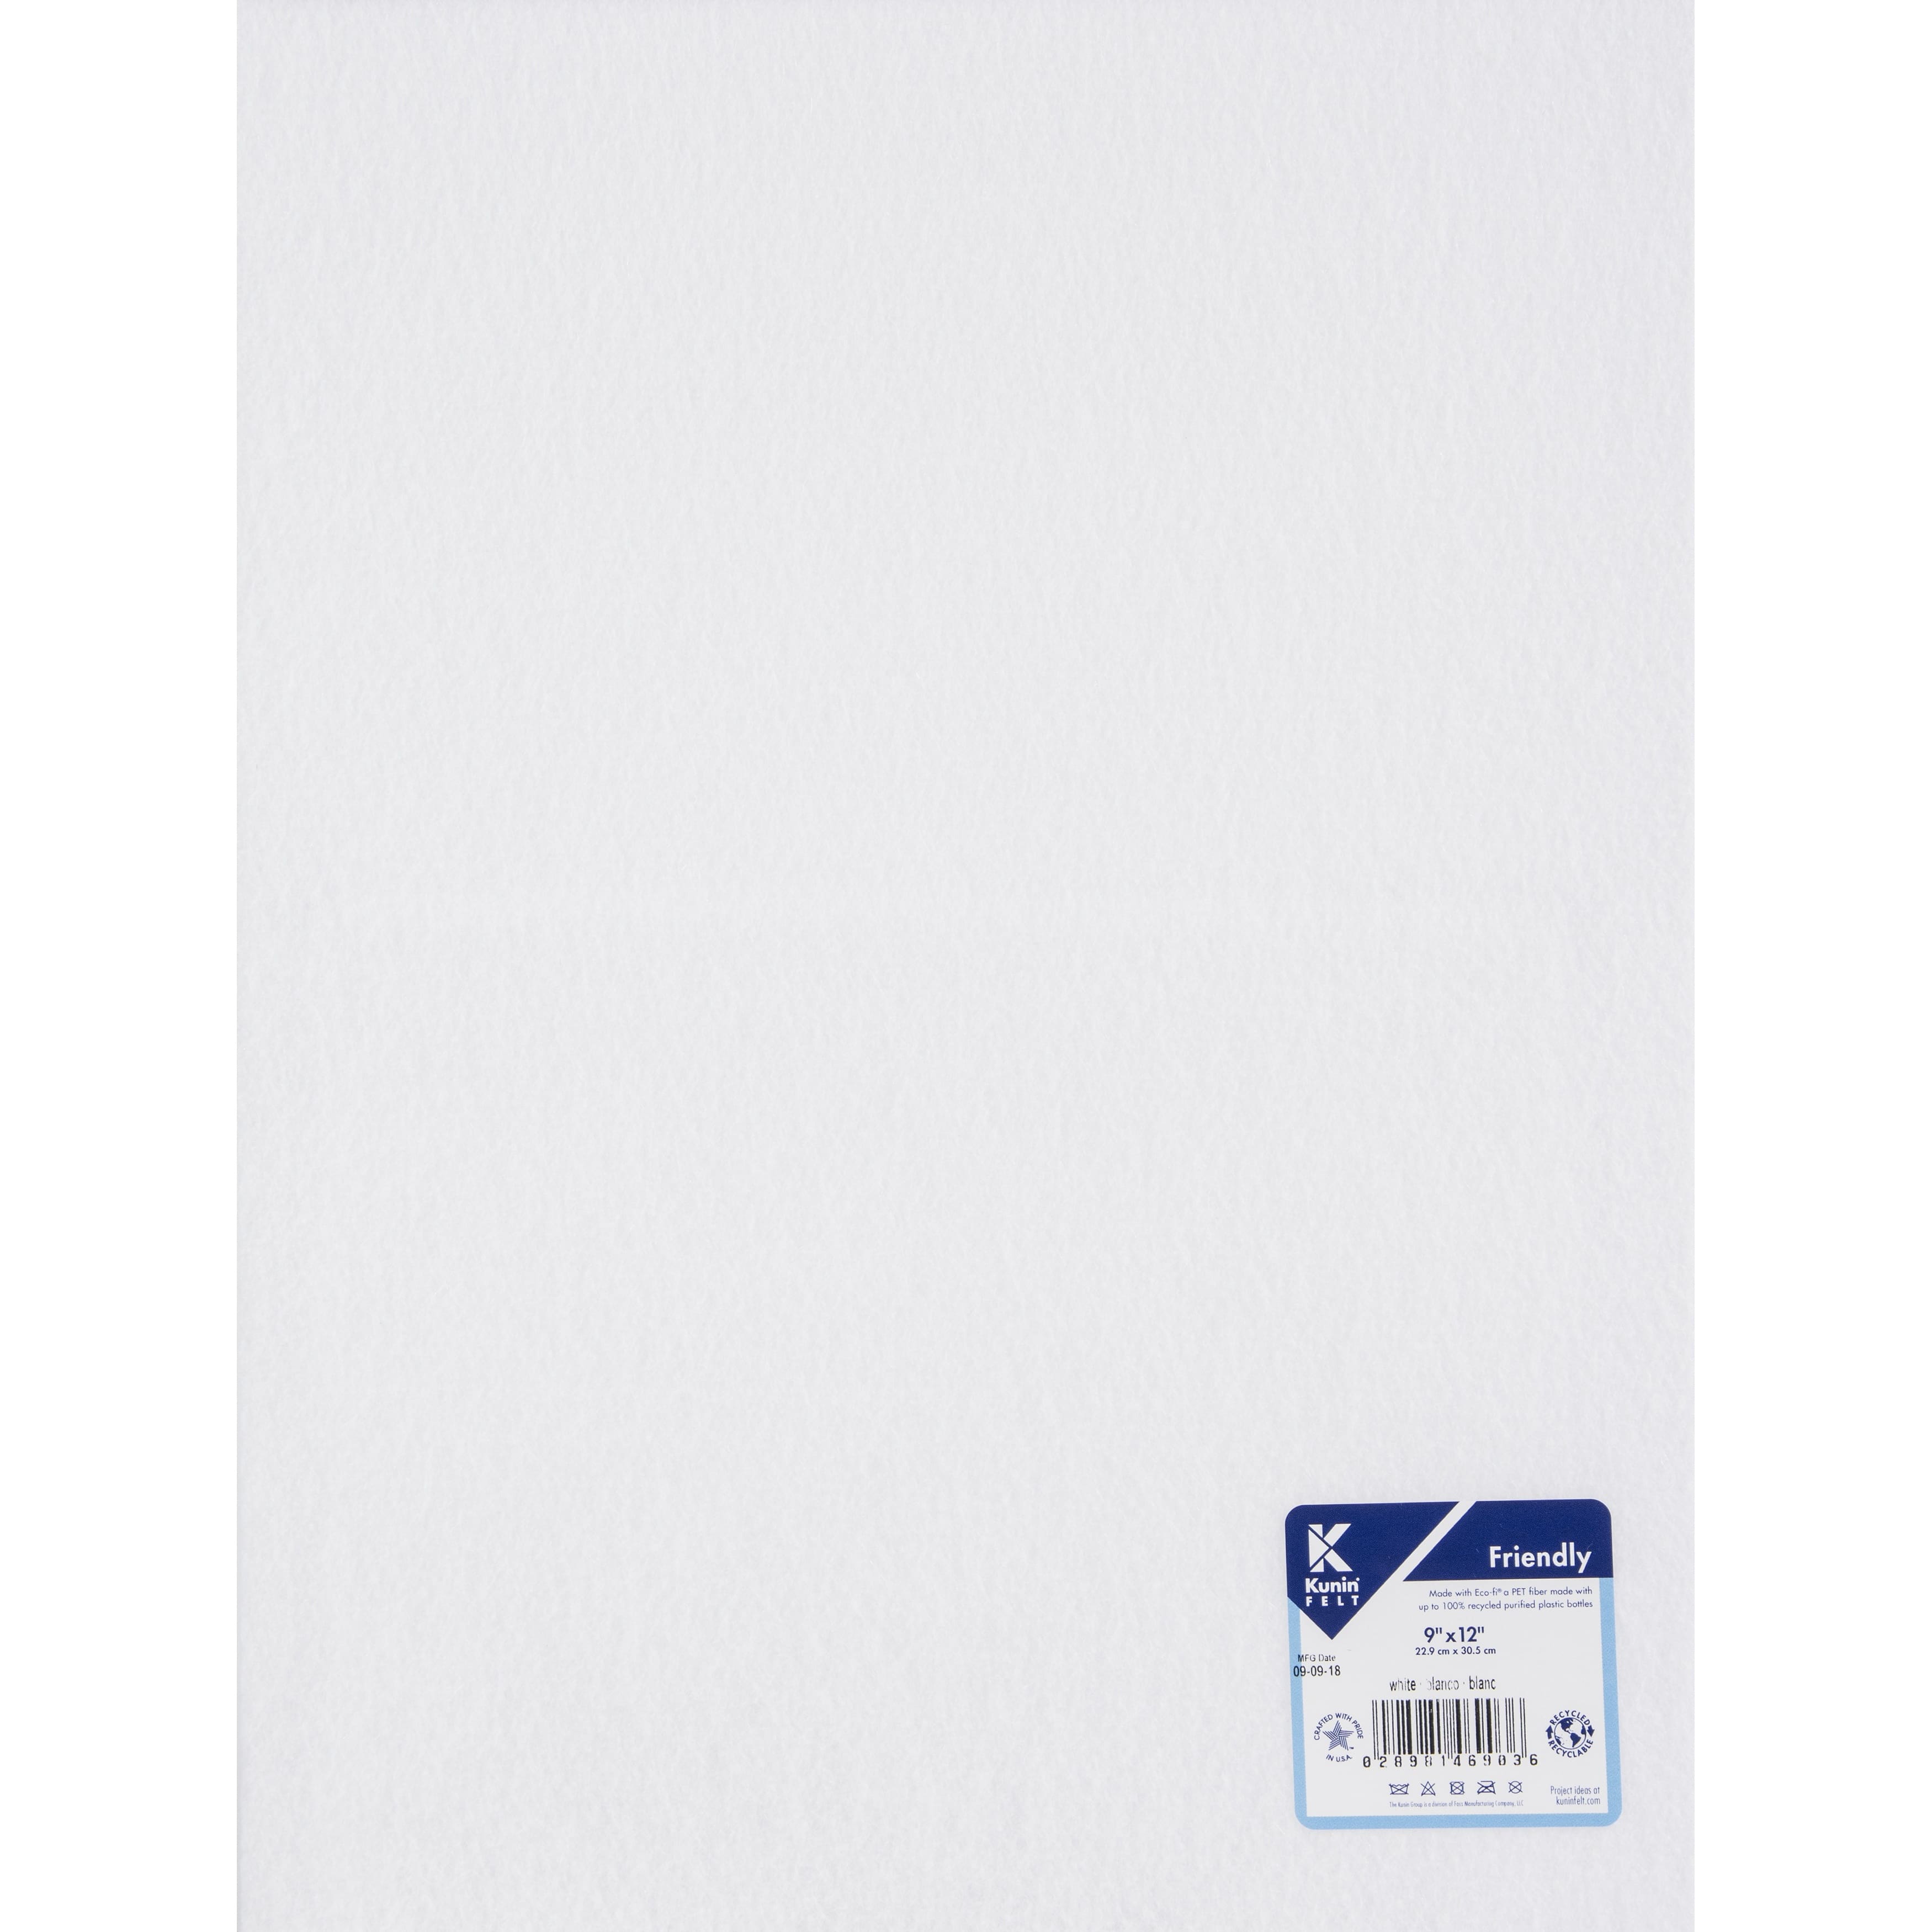 White Center 12 x 12 (30.5 x 30.5 cm) Specialty Paper